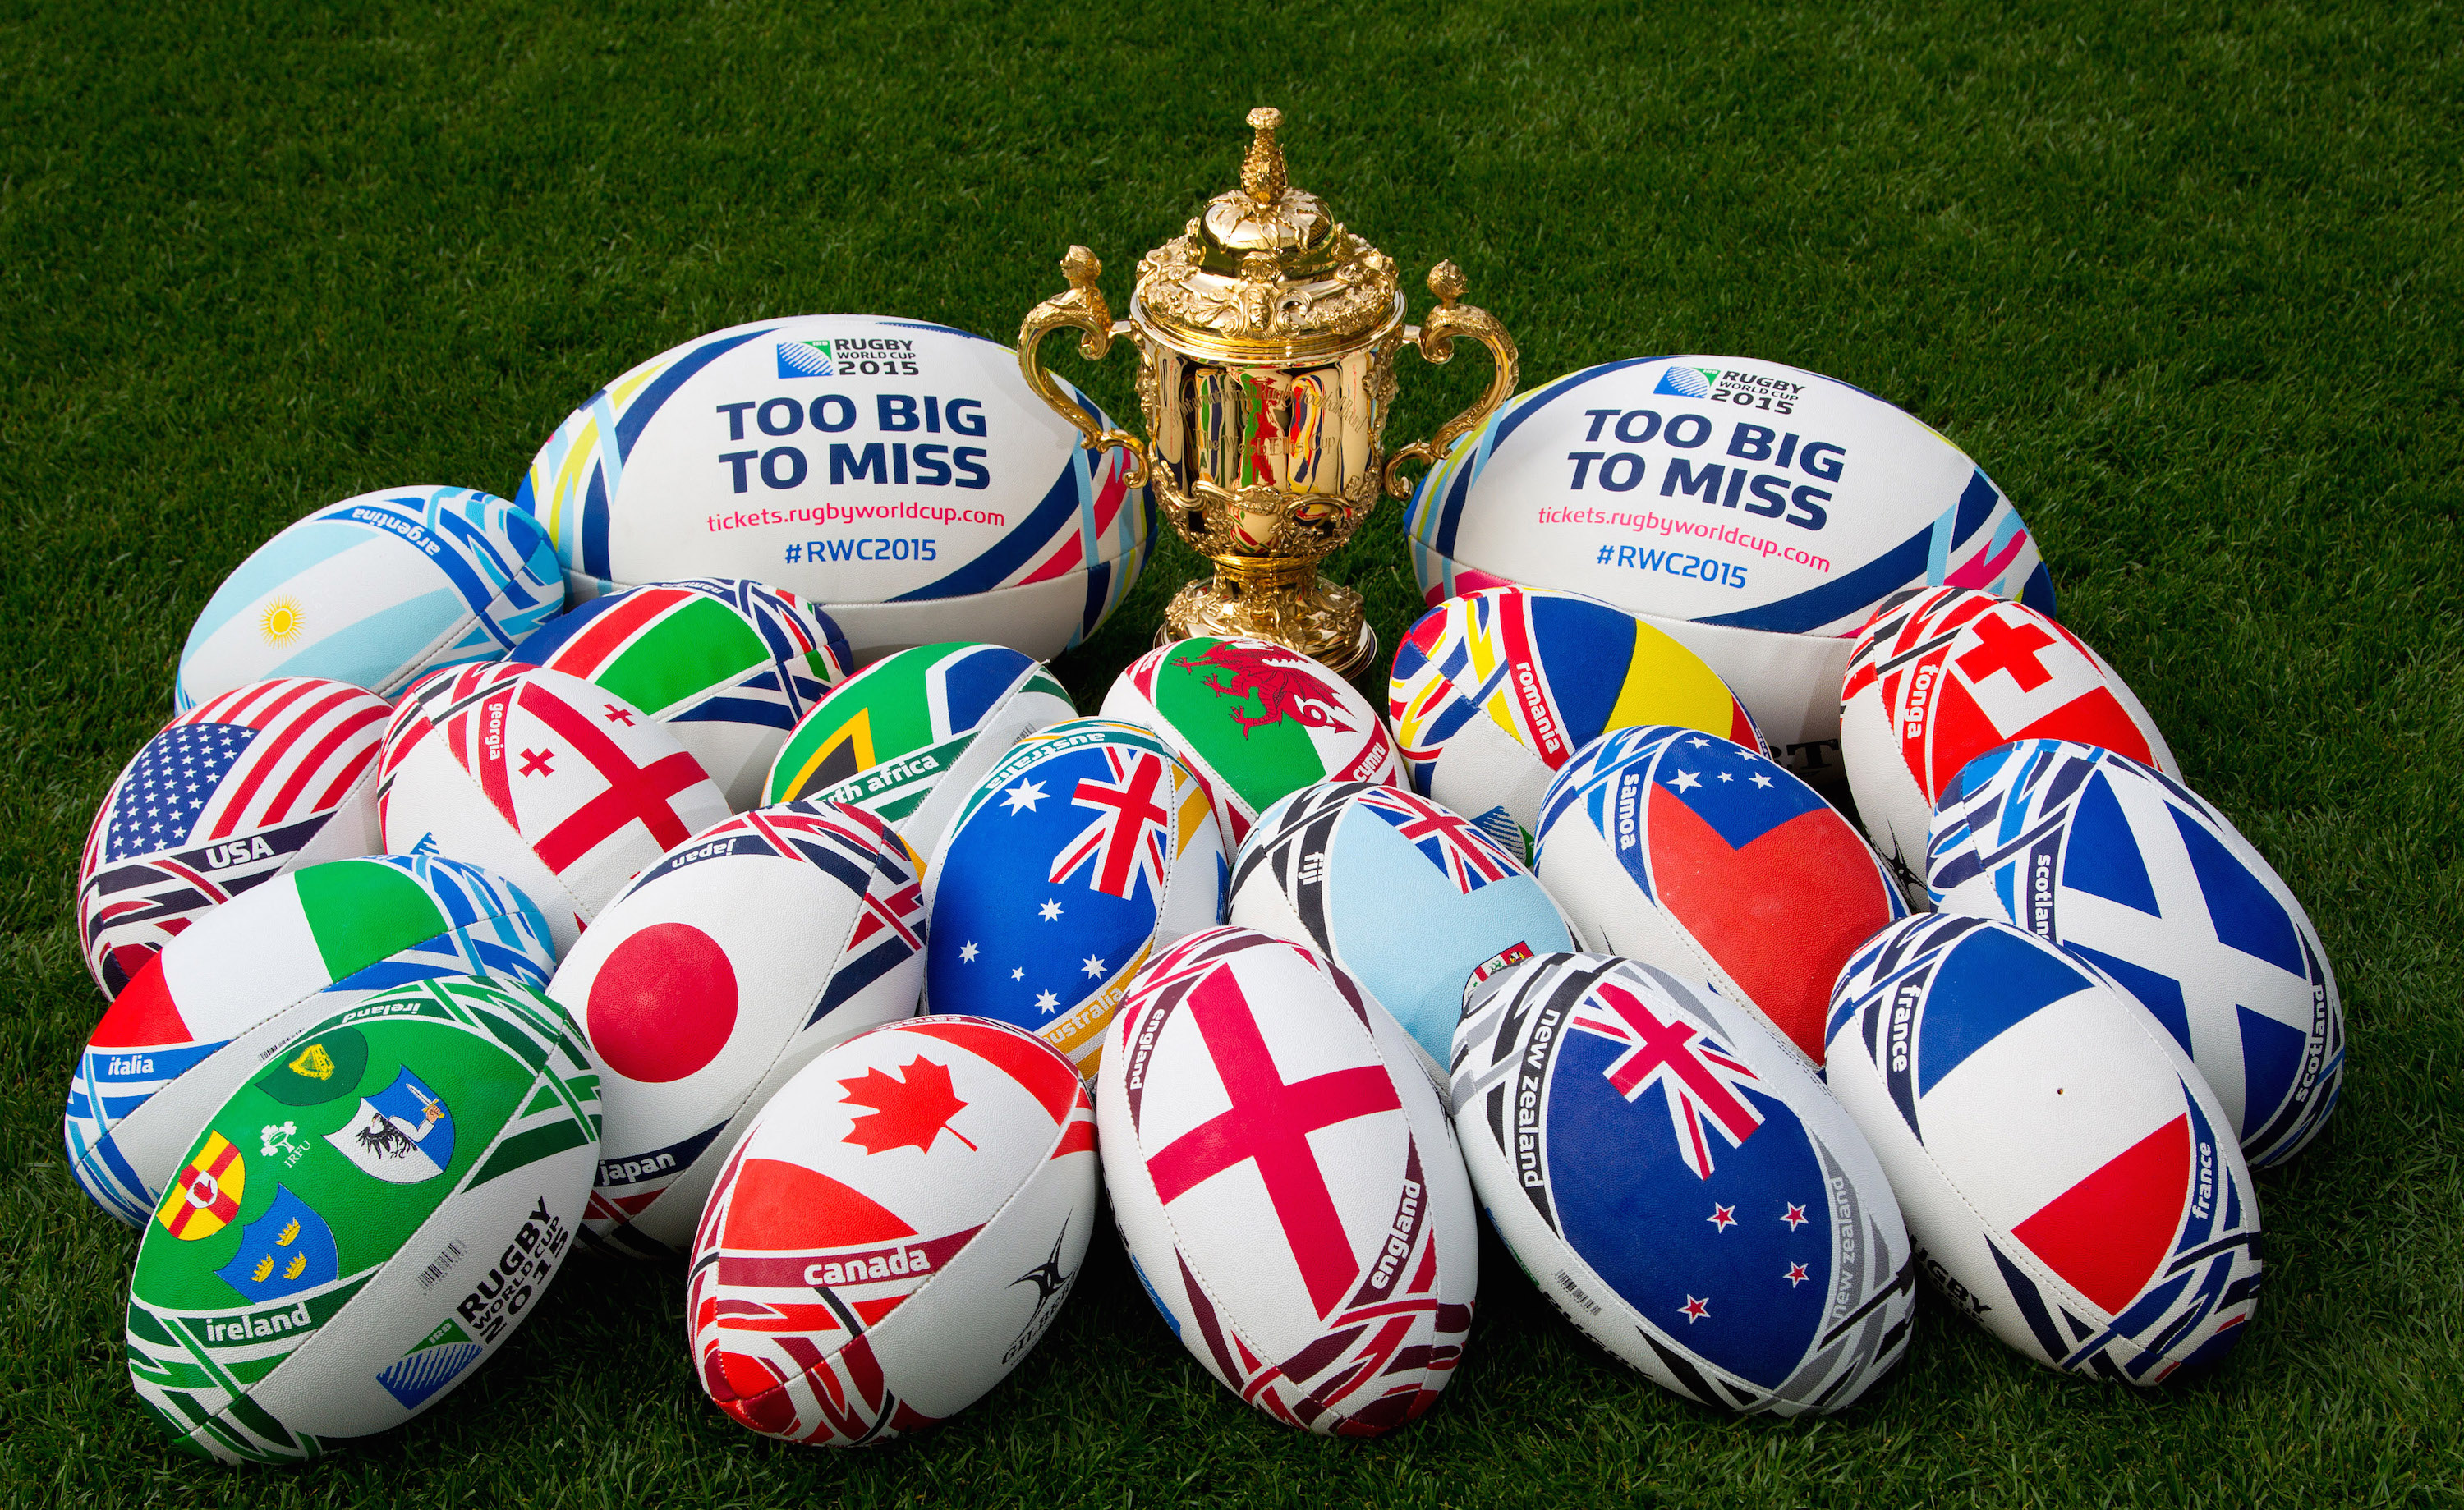 The British Consulate in Rio Hosts Rugby World Cup Event